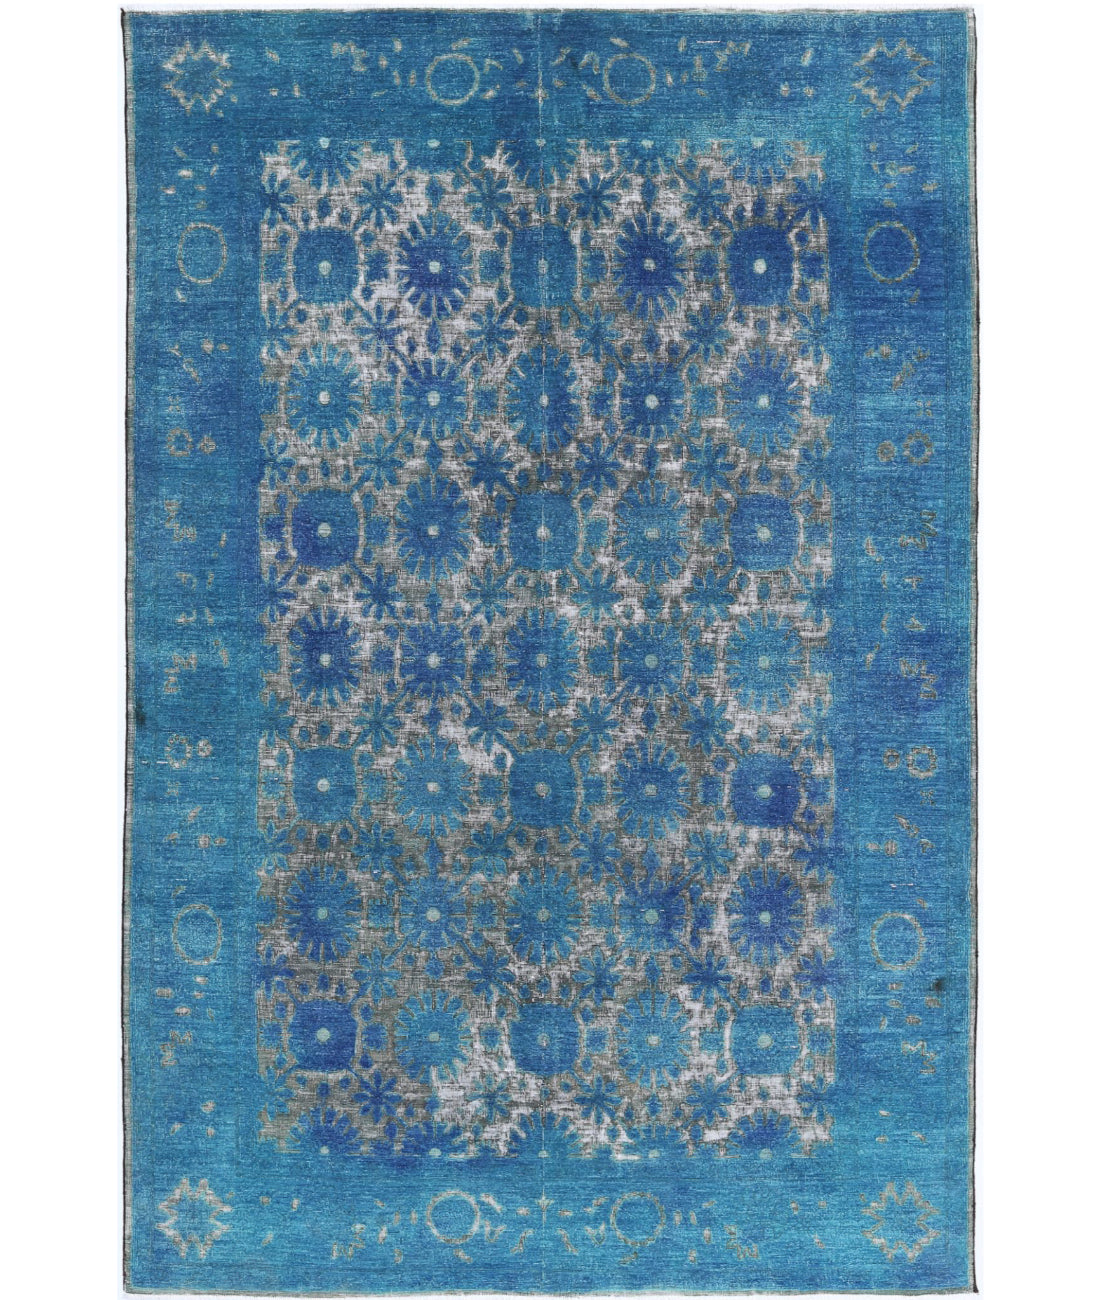 Hand Knotted Onyx Wool Rug - 5'10'' x 8'9'' 5'10'' x 8'9'' (175 X 263) / Blue / Blue